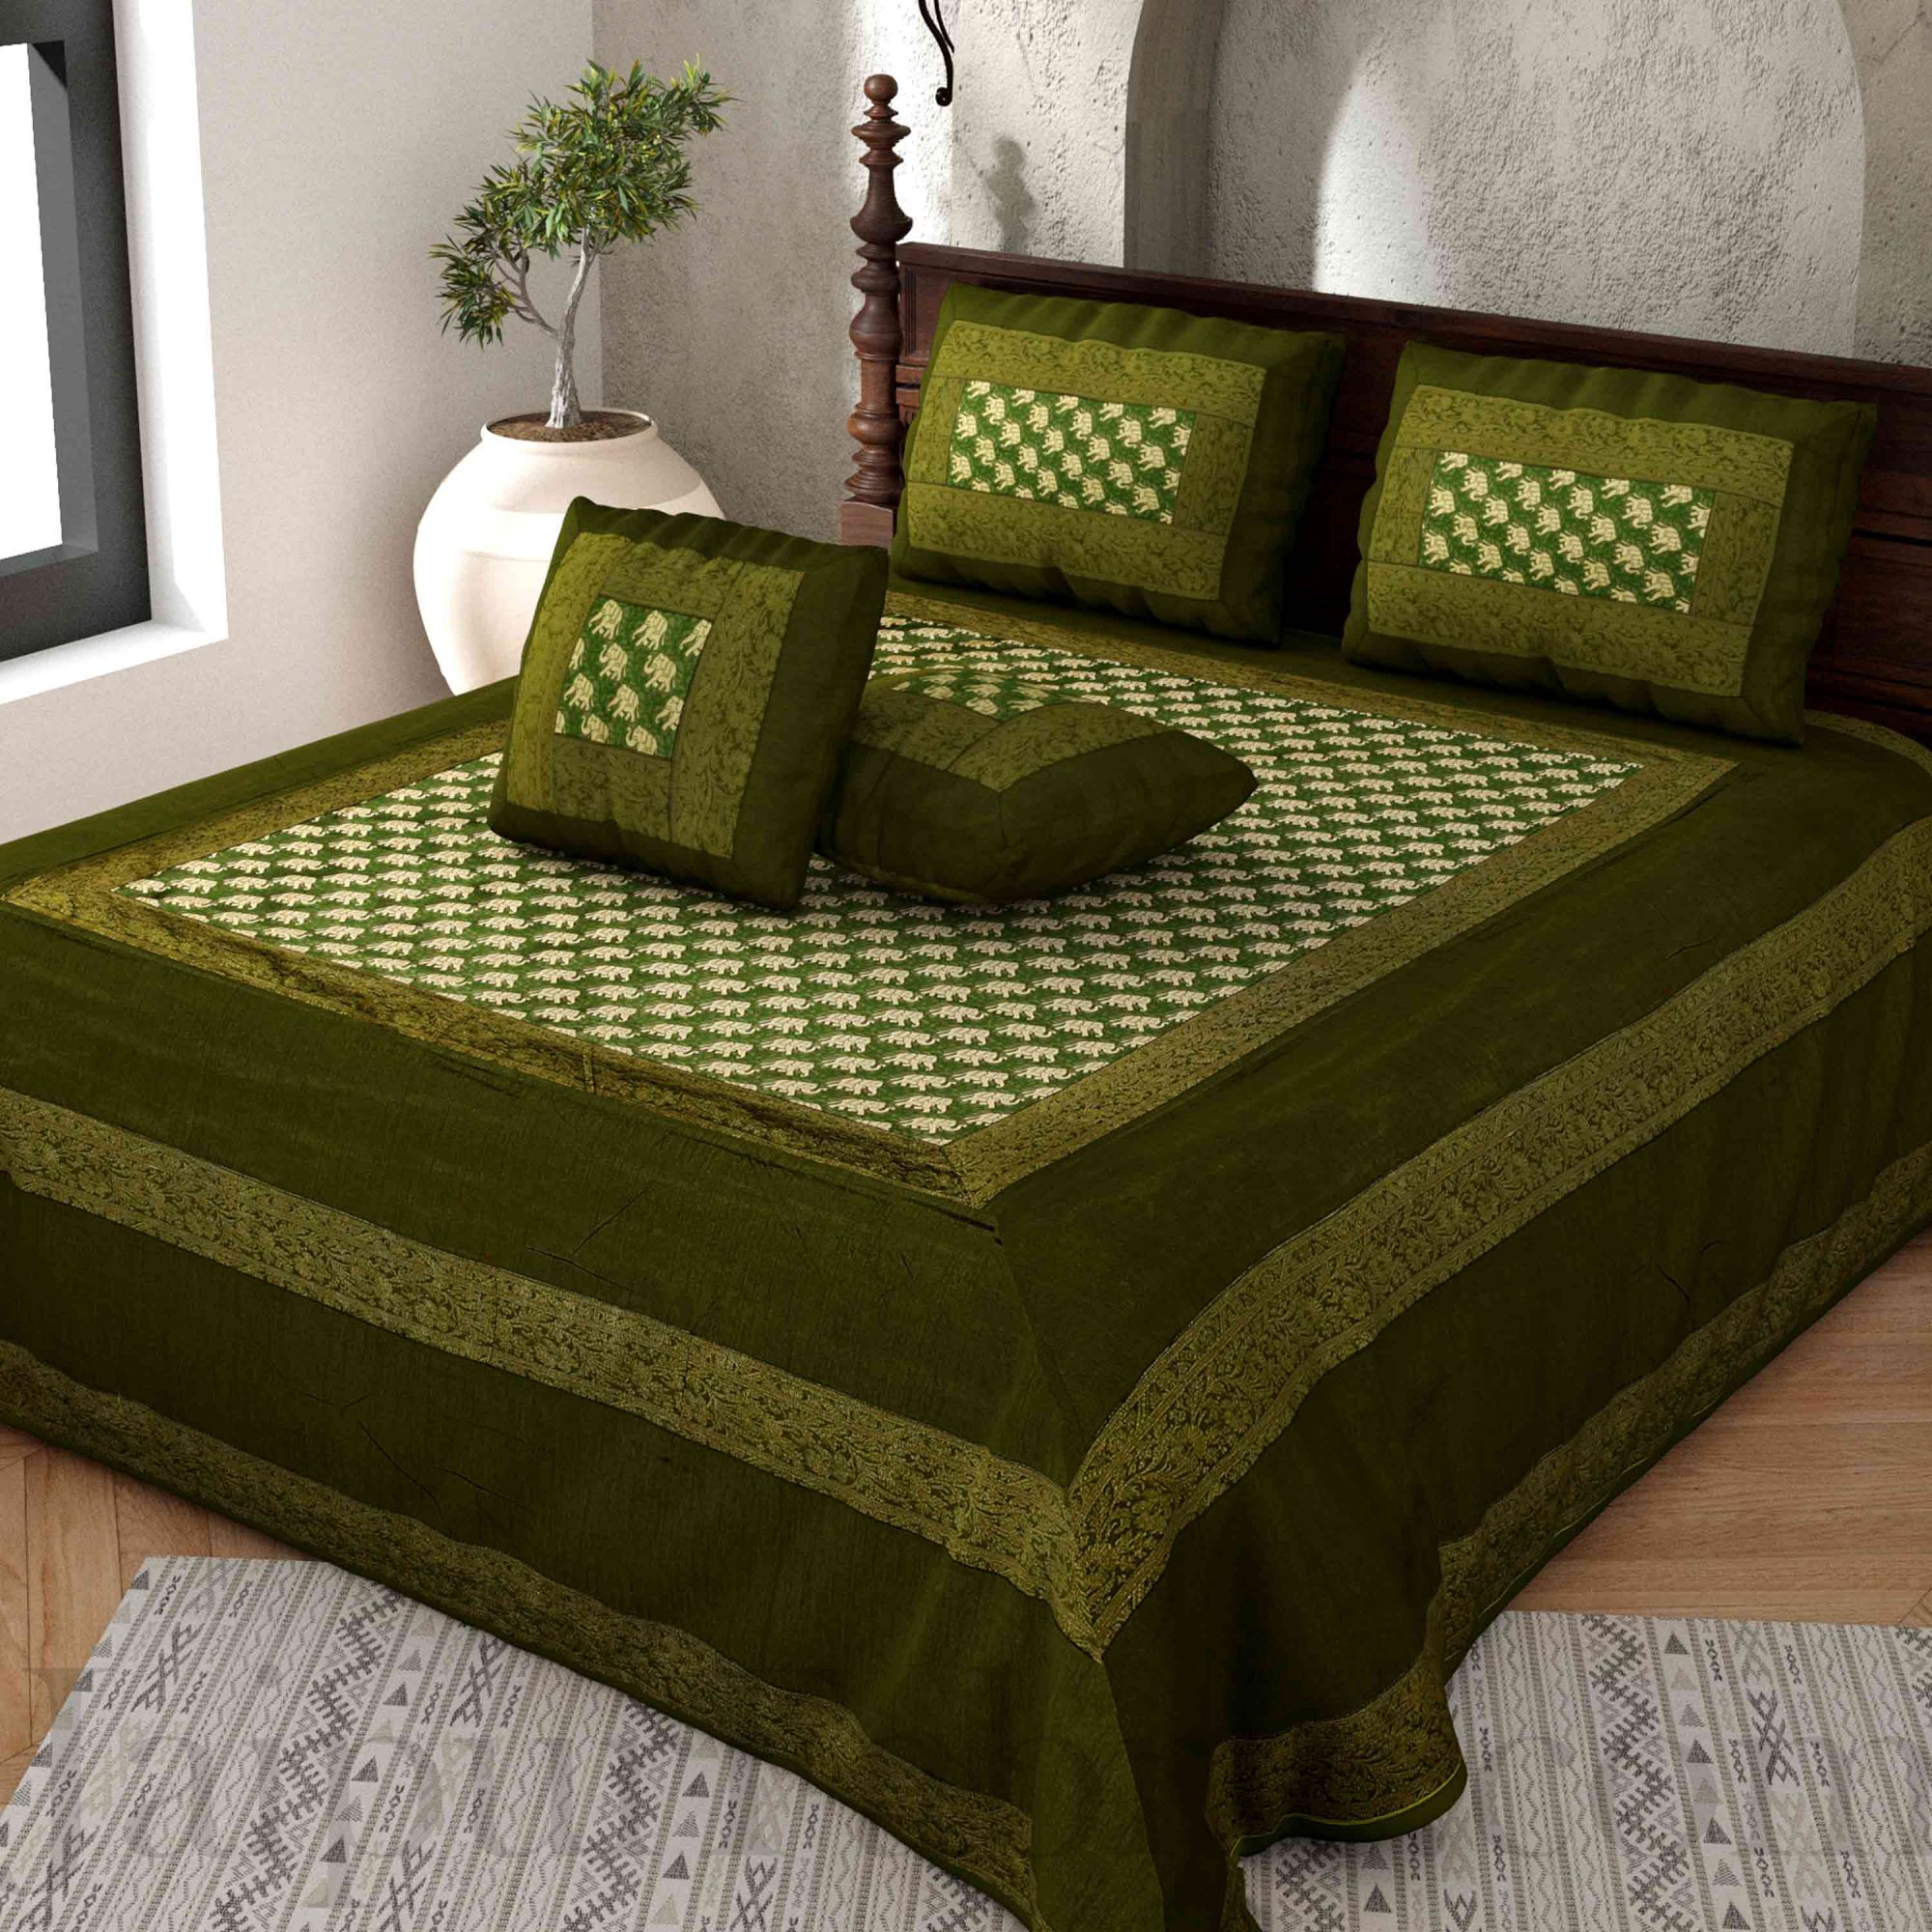 Green Rajasthani Zari Embroidered Lace Work Silk Double Bed Sheet